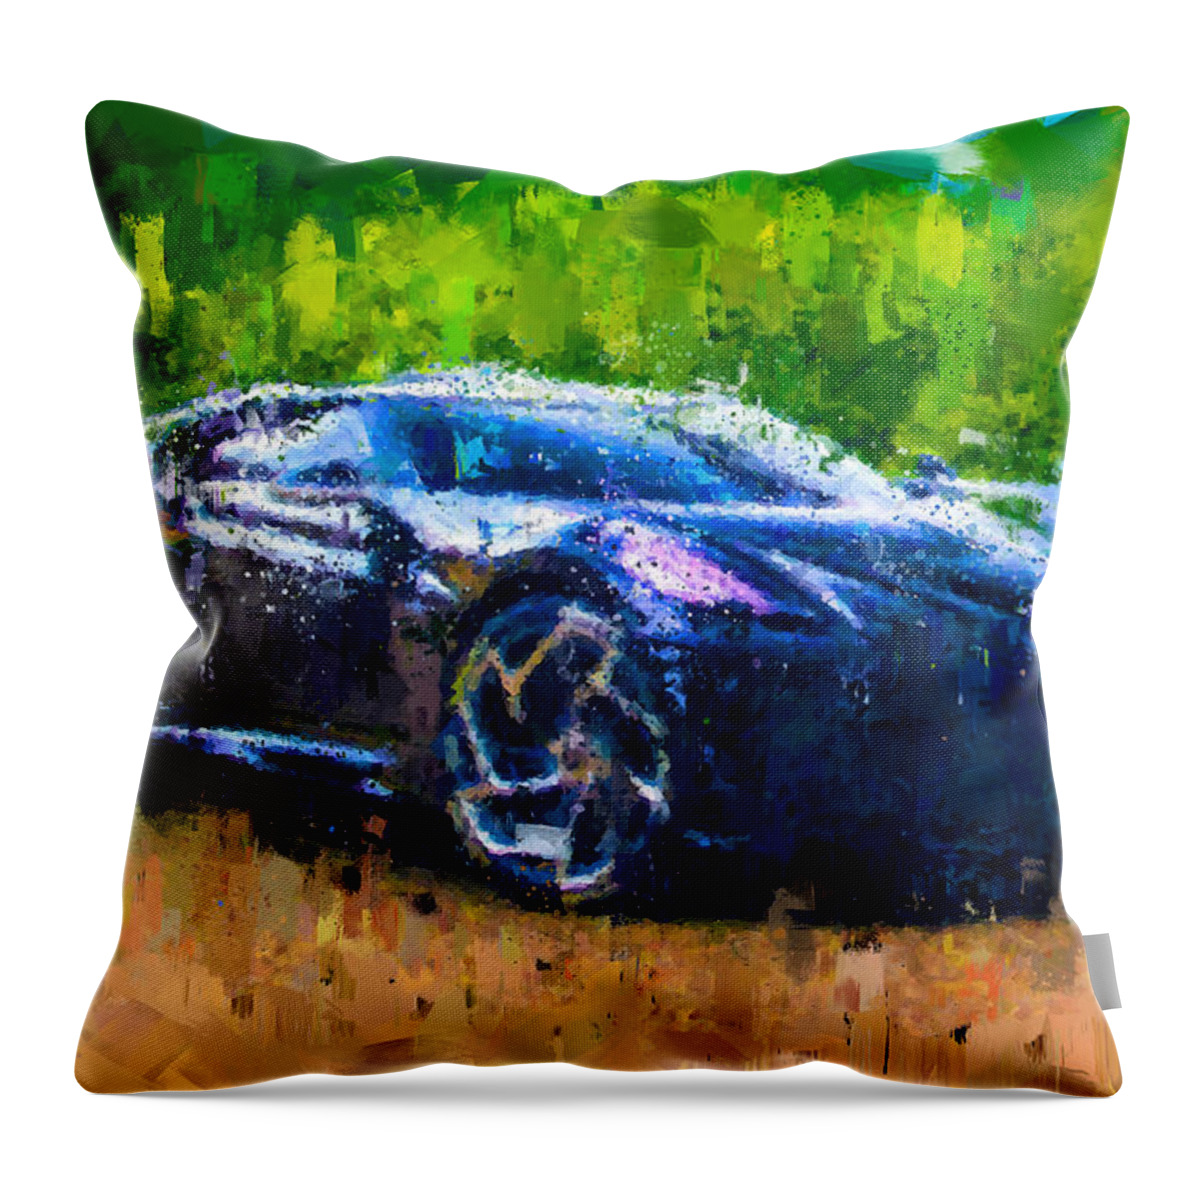 Bugatti Throw Pillow featuring the painting Bugatti La Voiture Noire by Vart. by Vart